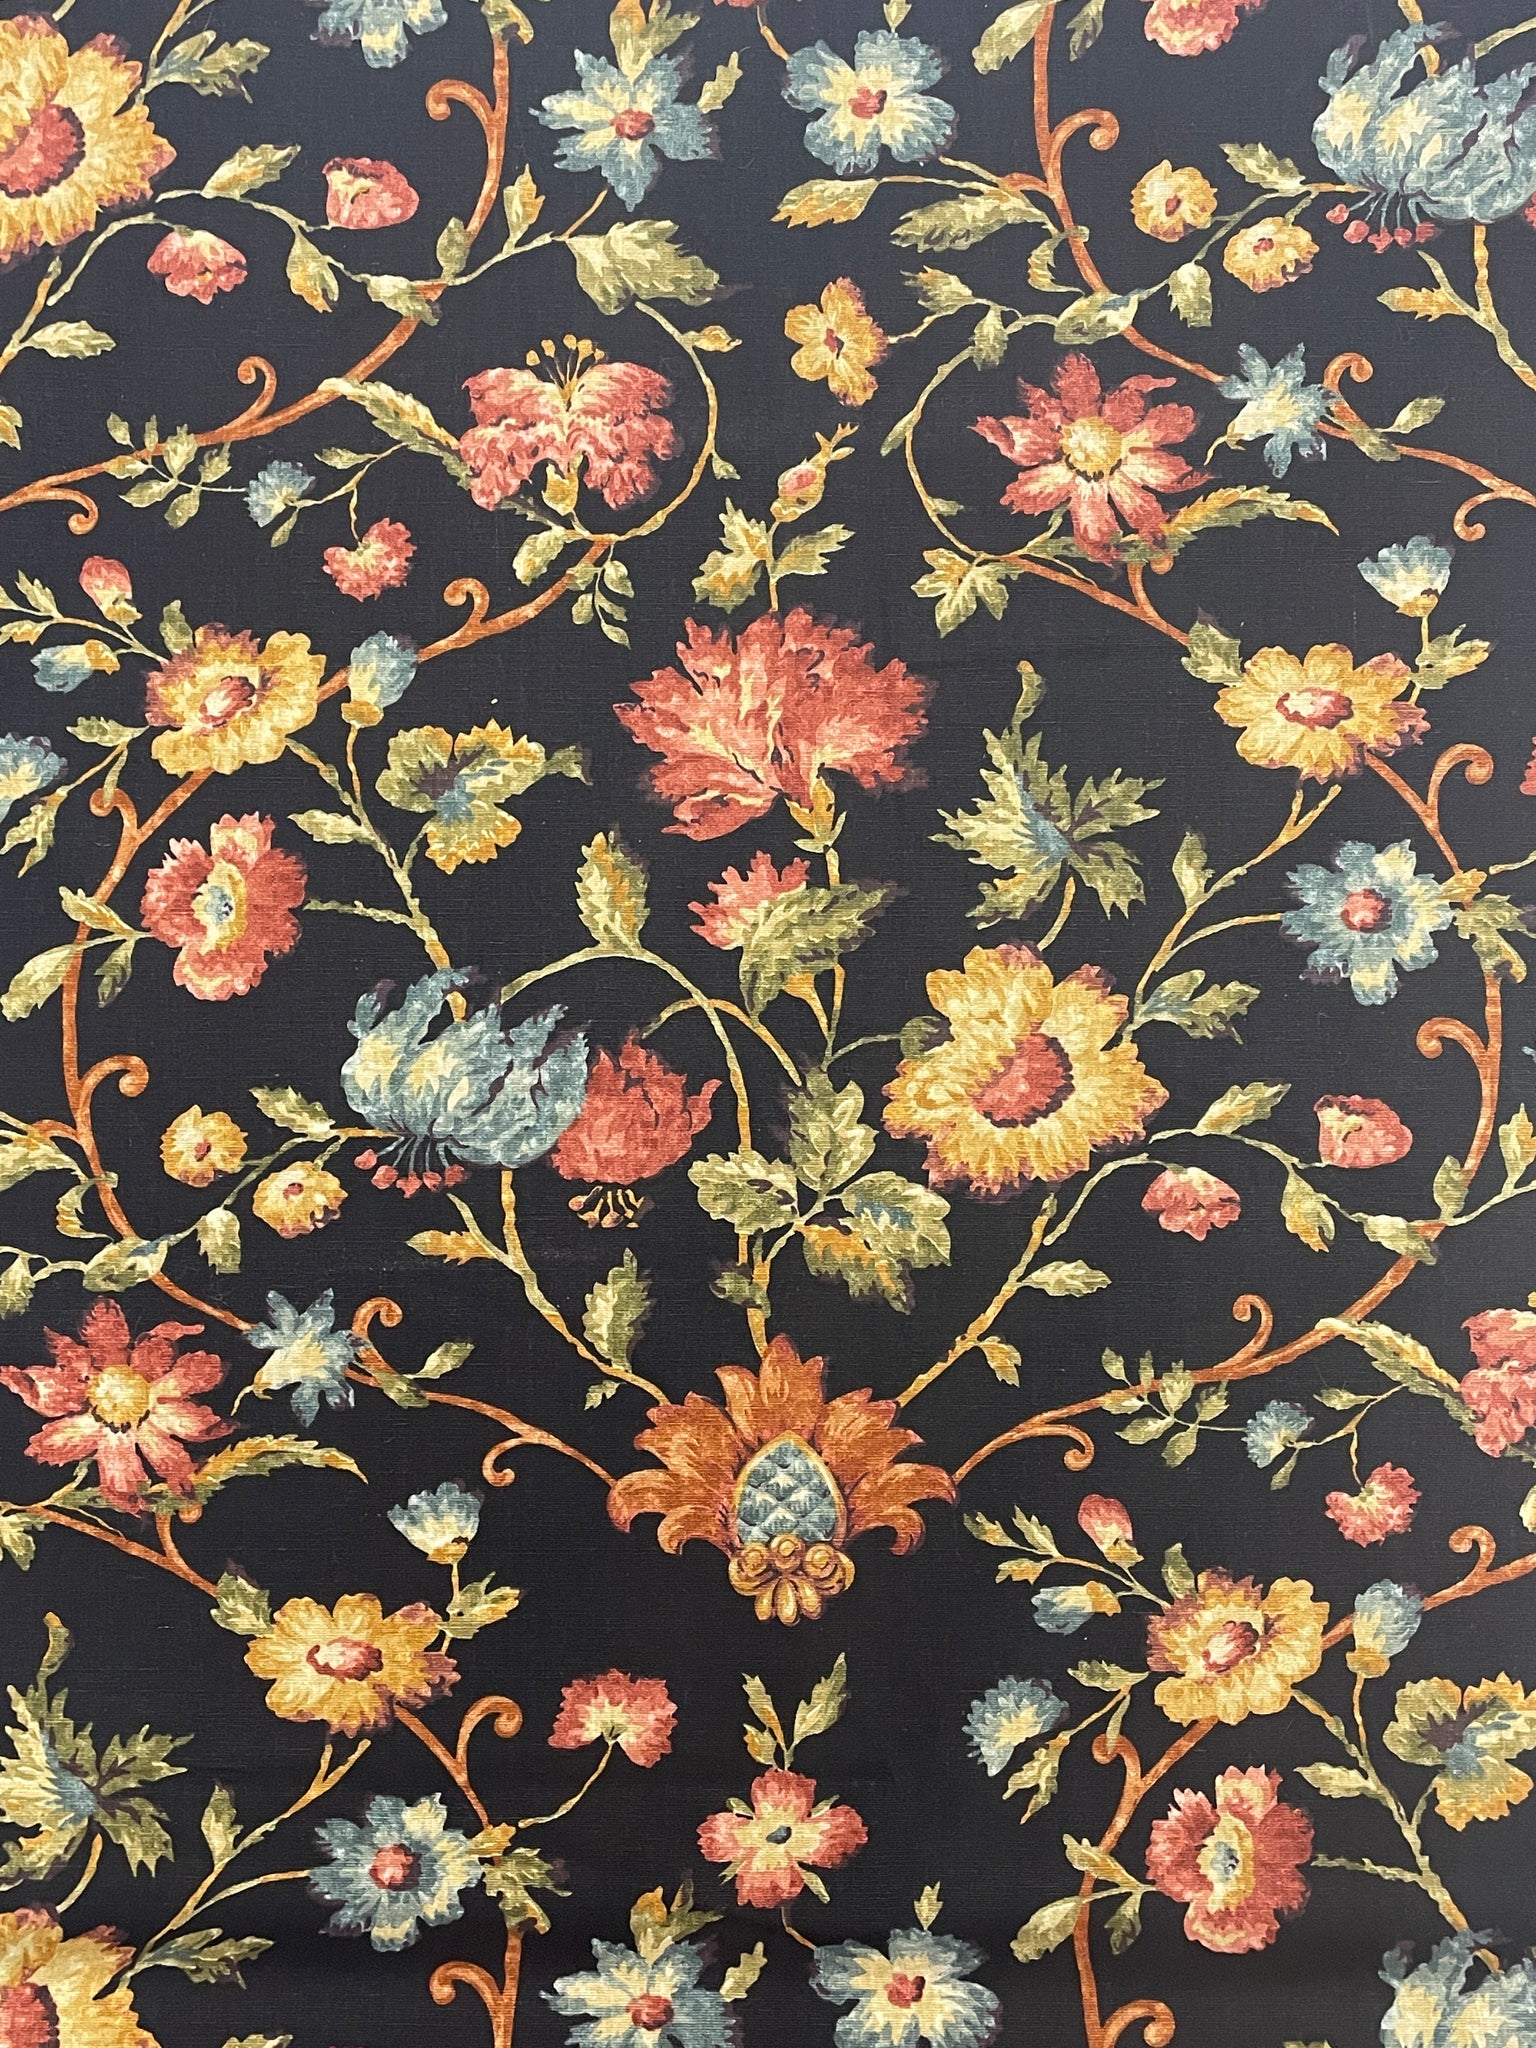 Cotton - Black with Flowers